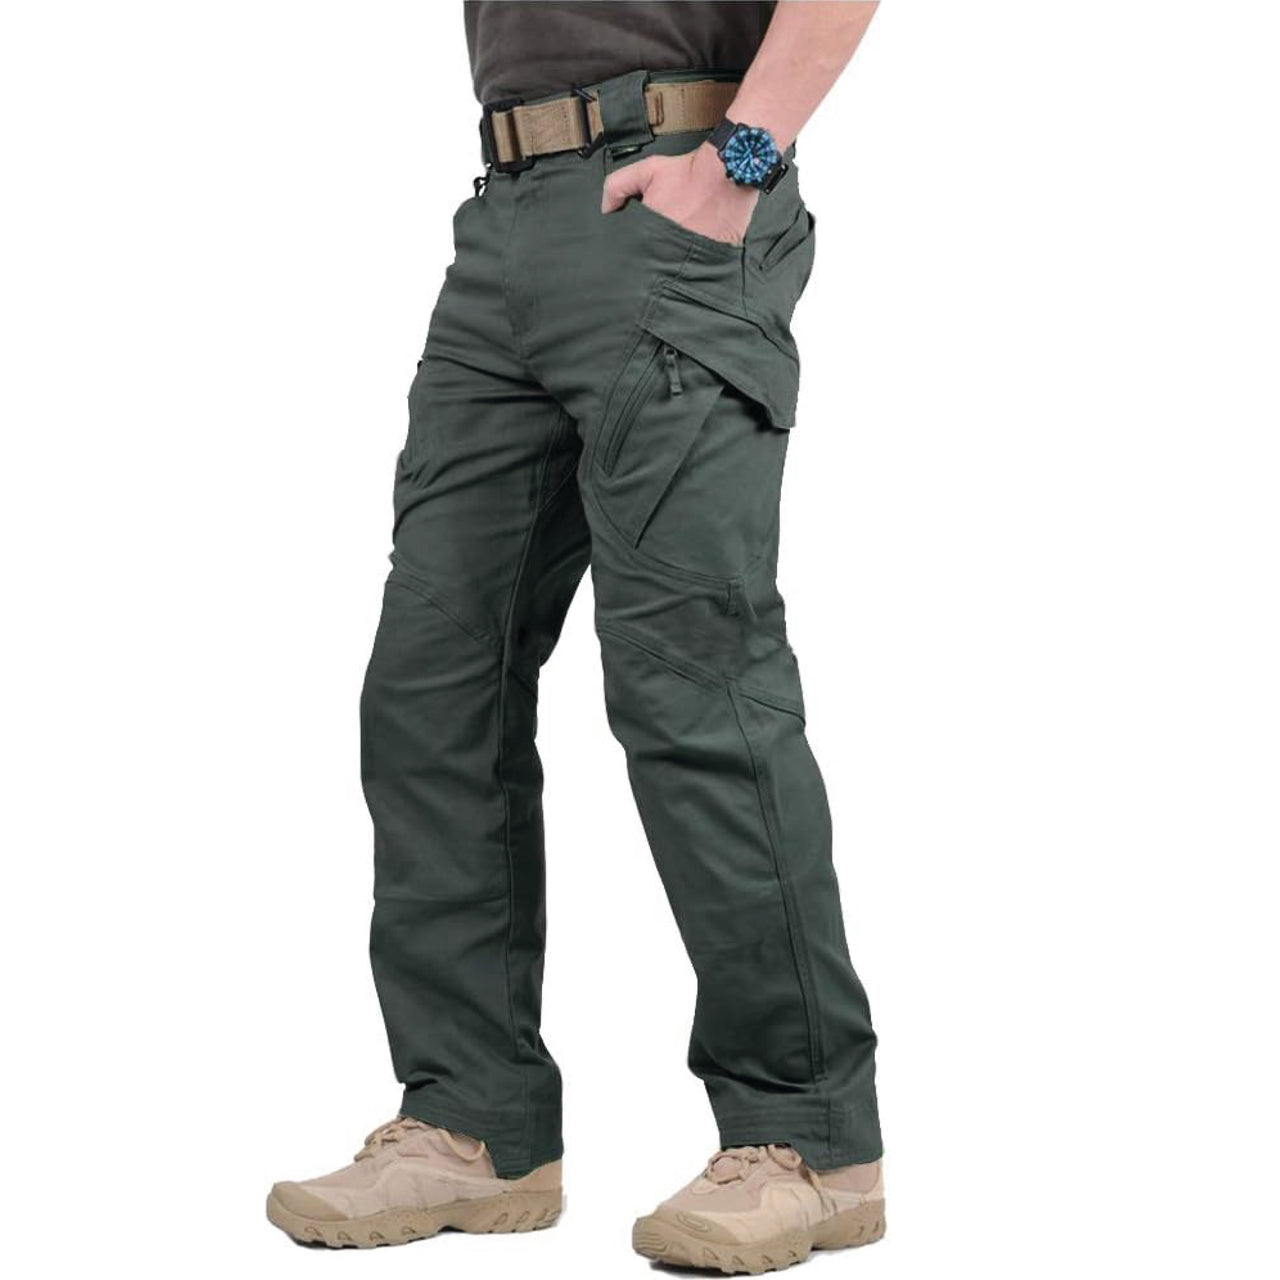 HARD LAND Women's Tactical Cargo Pants Water Resistant Ripstop BDU Pant  Stretch Lightweight Hiking Size 10 Coyote Brown : Amazon.in: Fashion